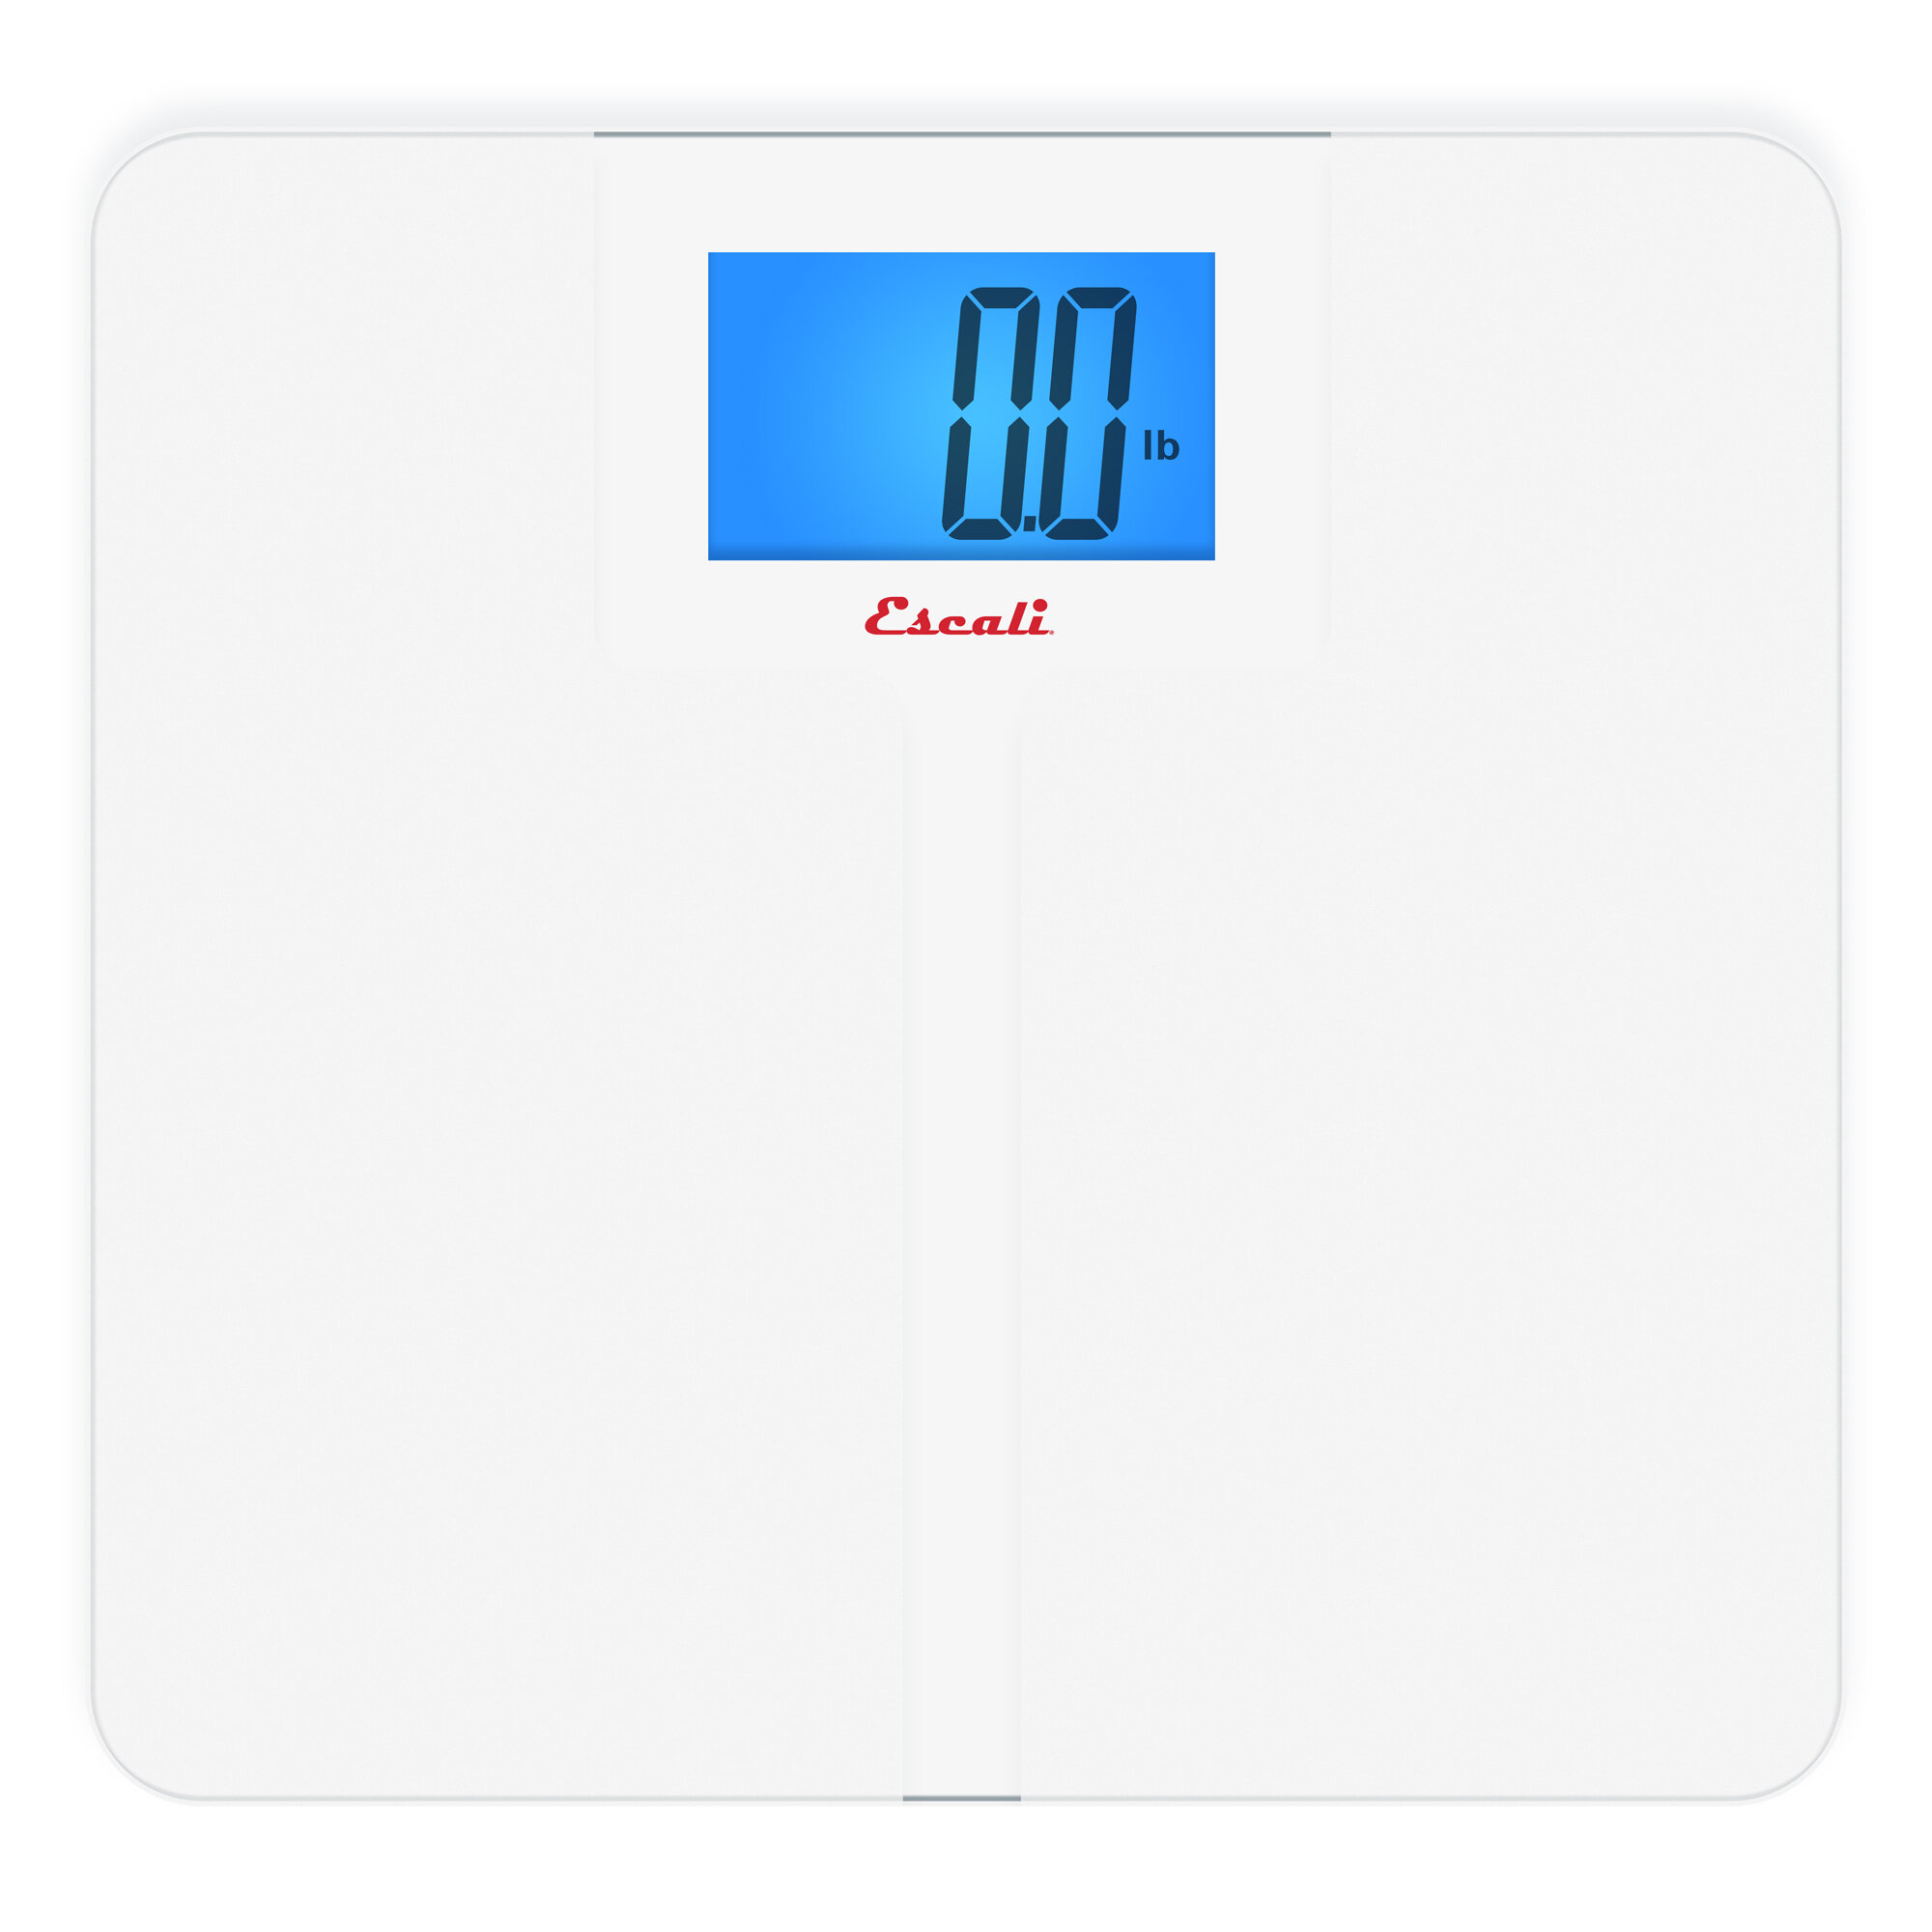 Why Do I Weigh Less on a Carpet? – INEVIFIT